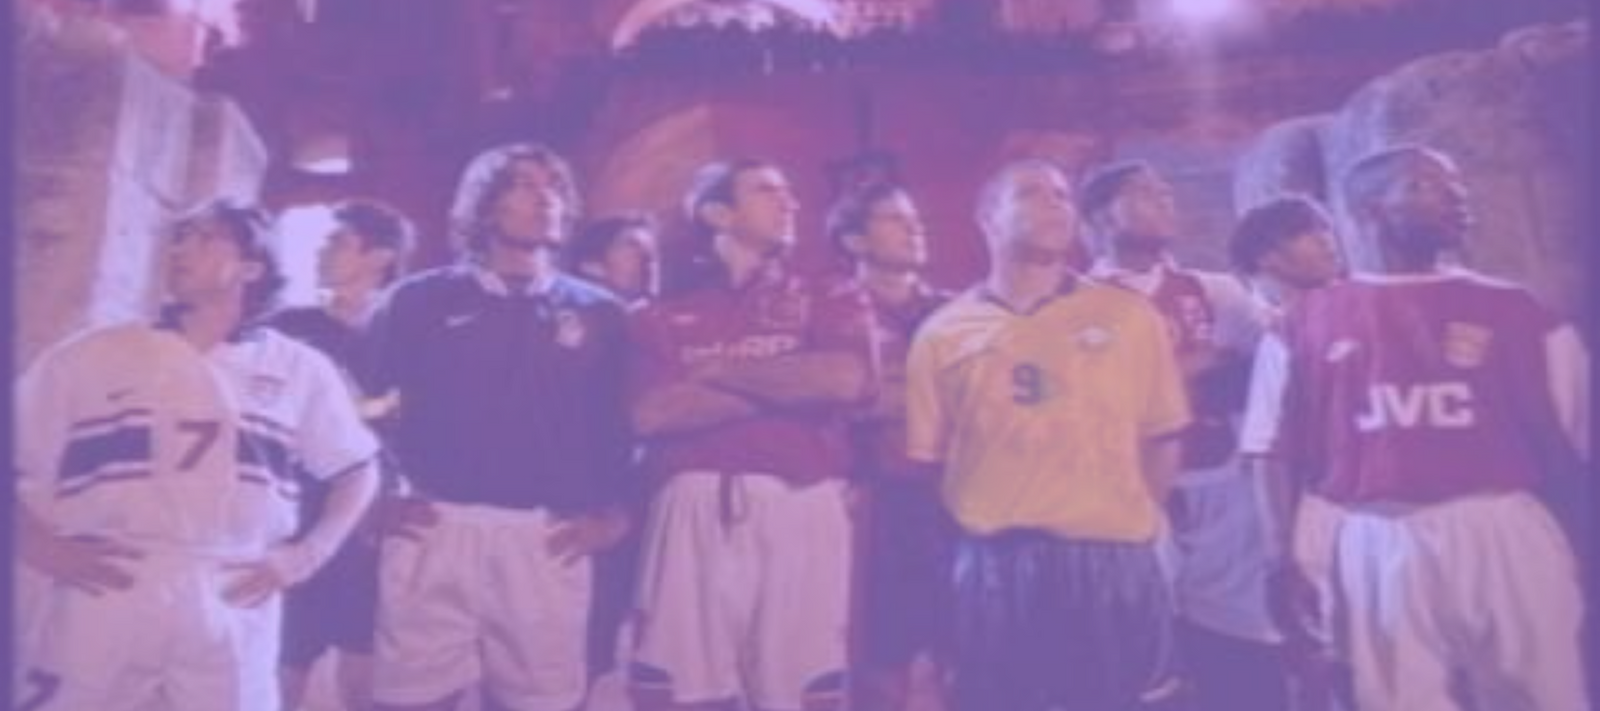 The ad that included Umbro Kappa - Football Collective